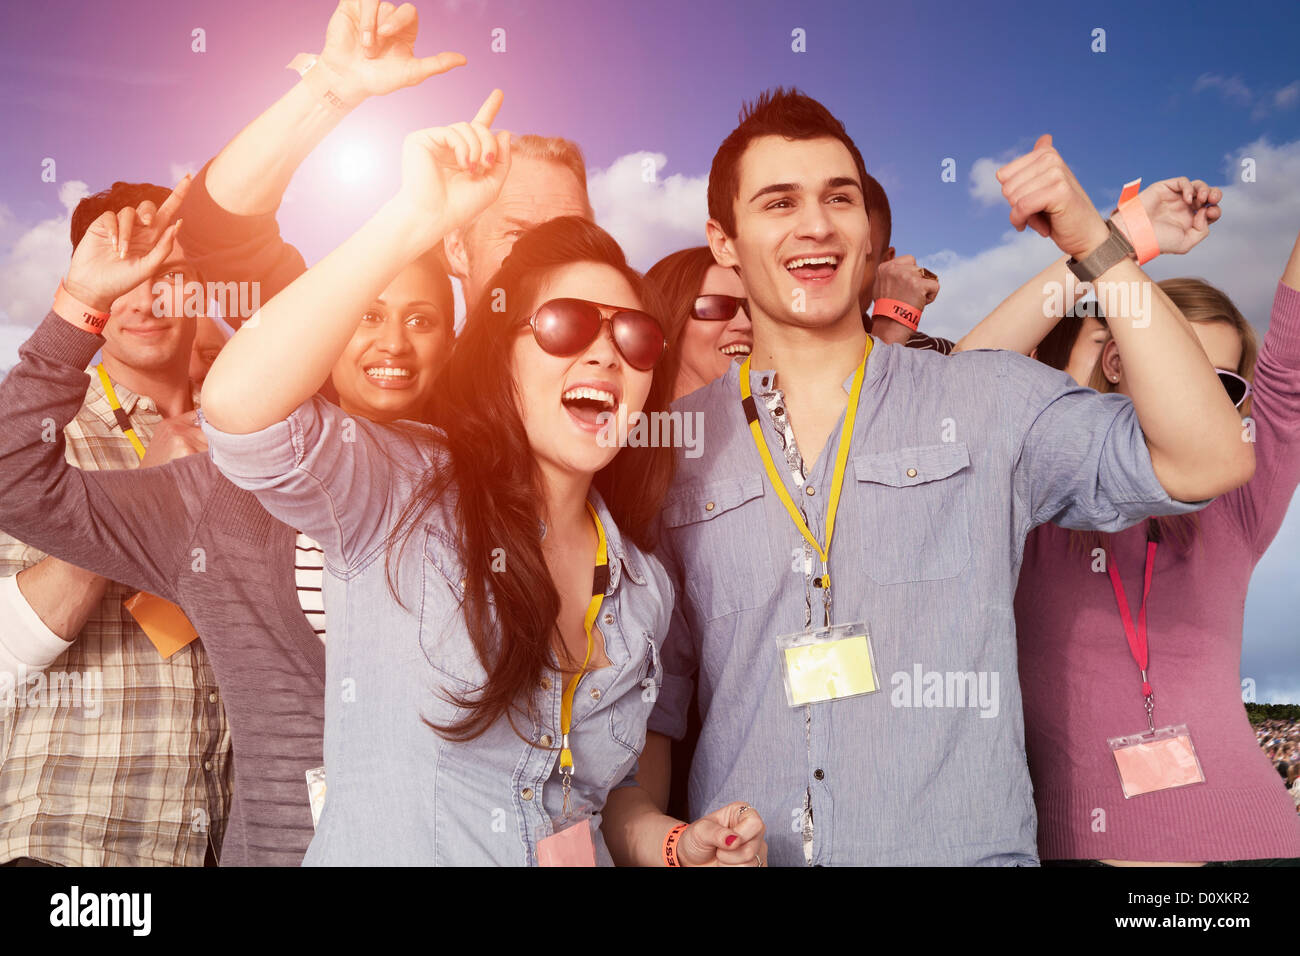 People cheering at a music festival Stock Photo